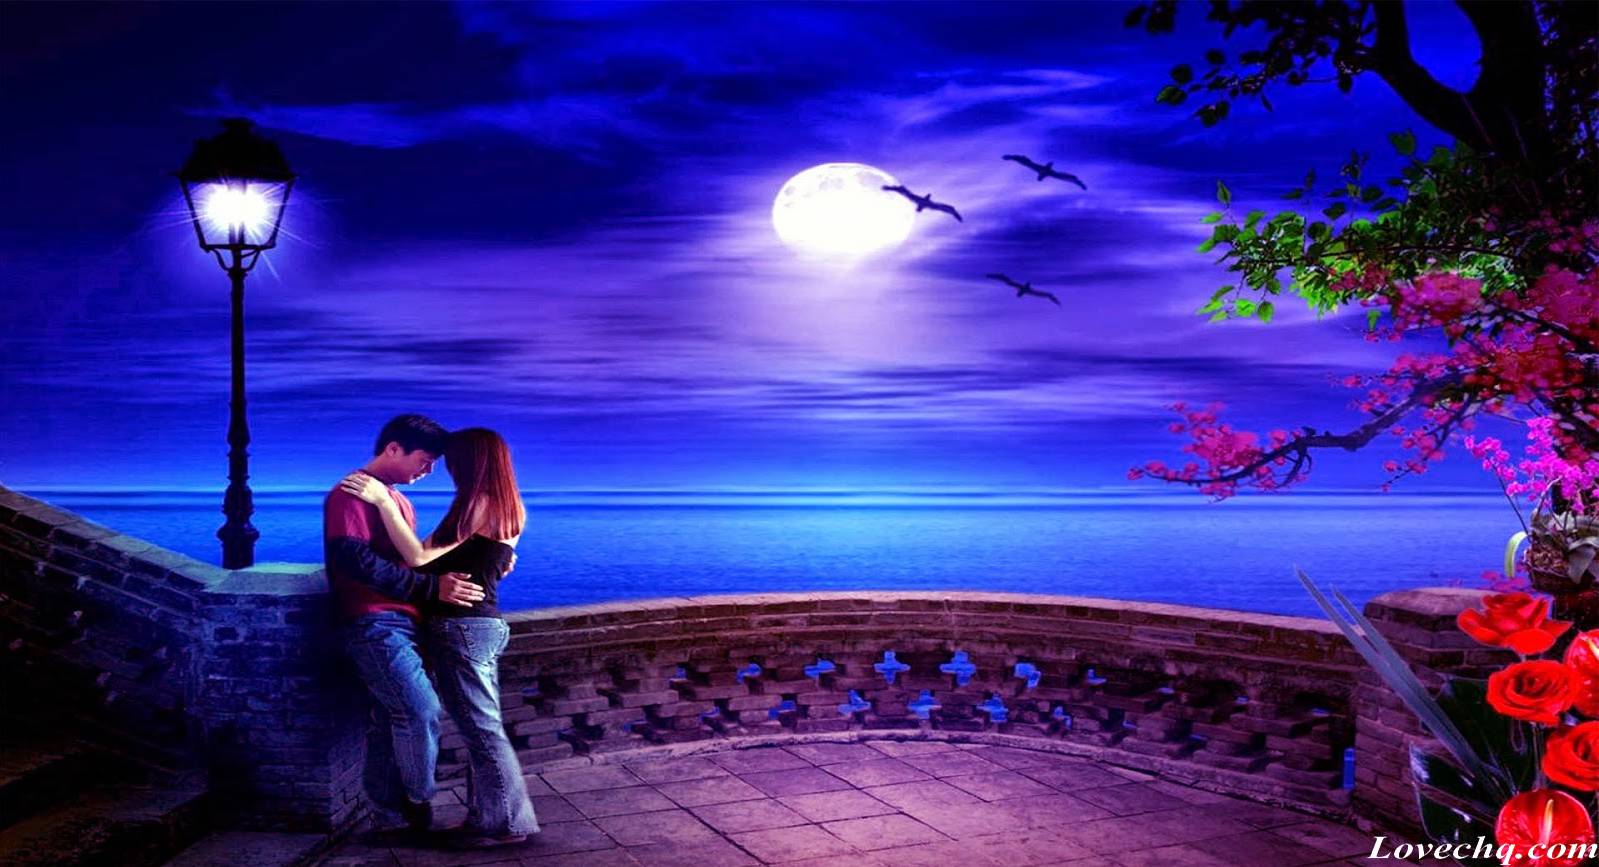 Romantic Love Hd Images Free Download 32 Background Wallpaper